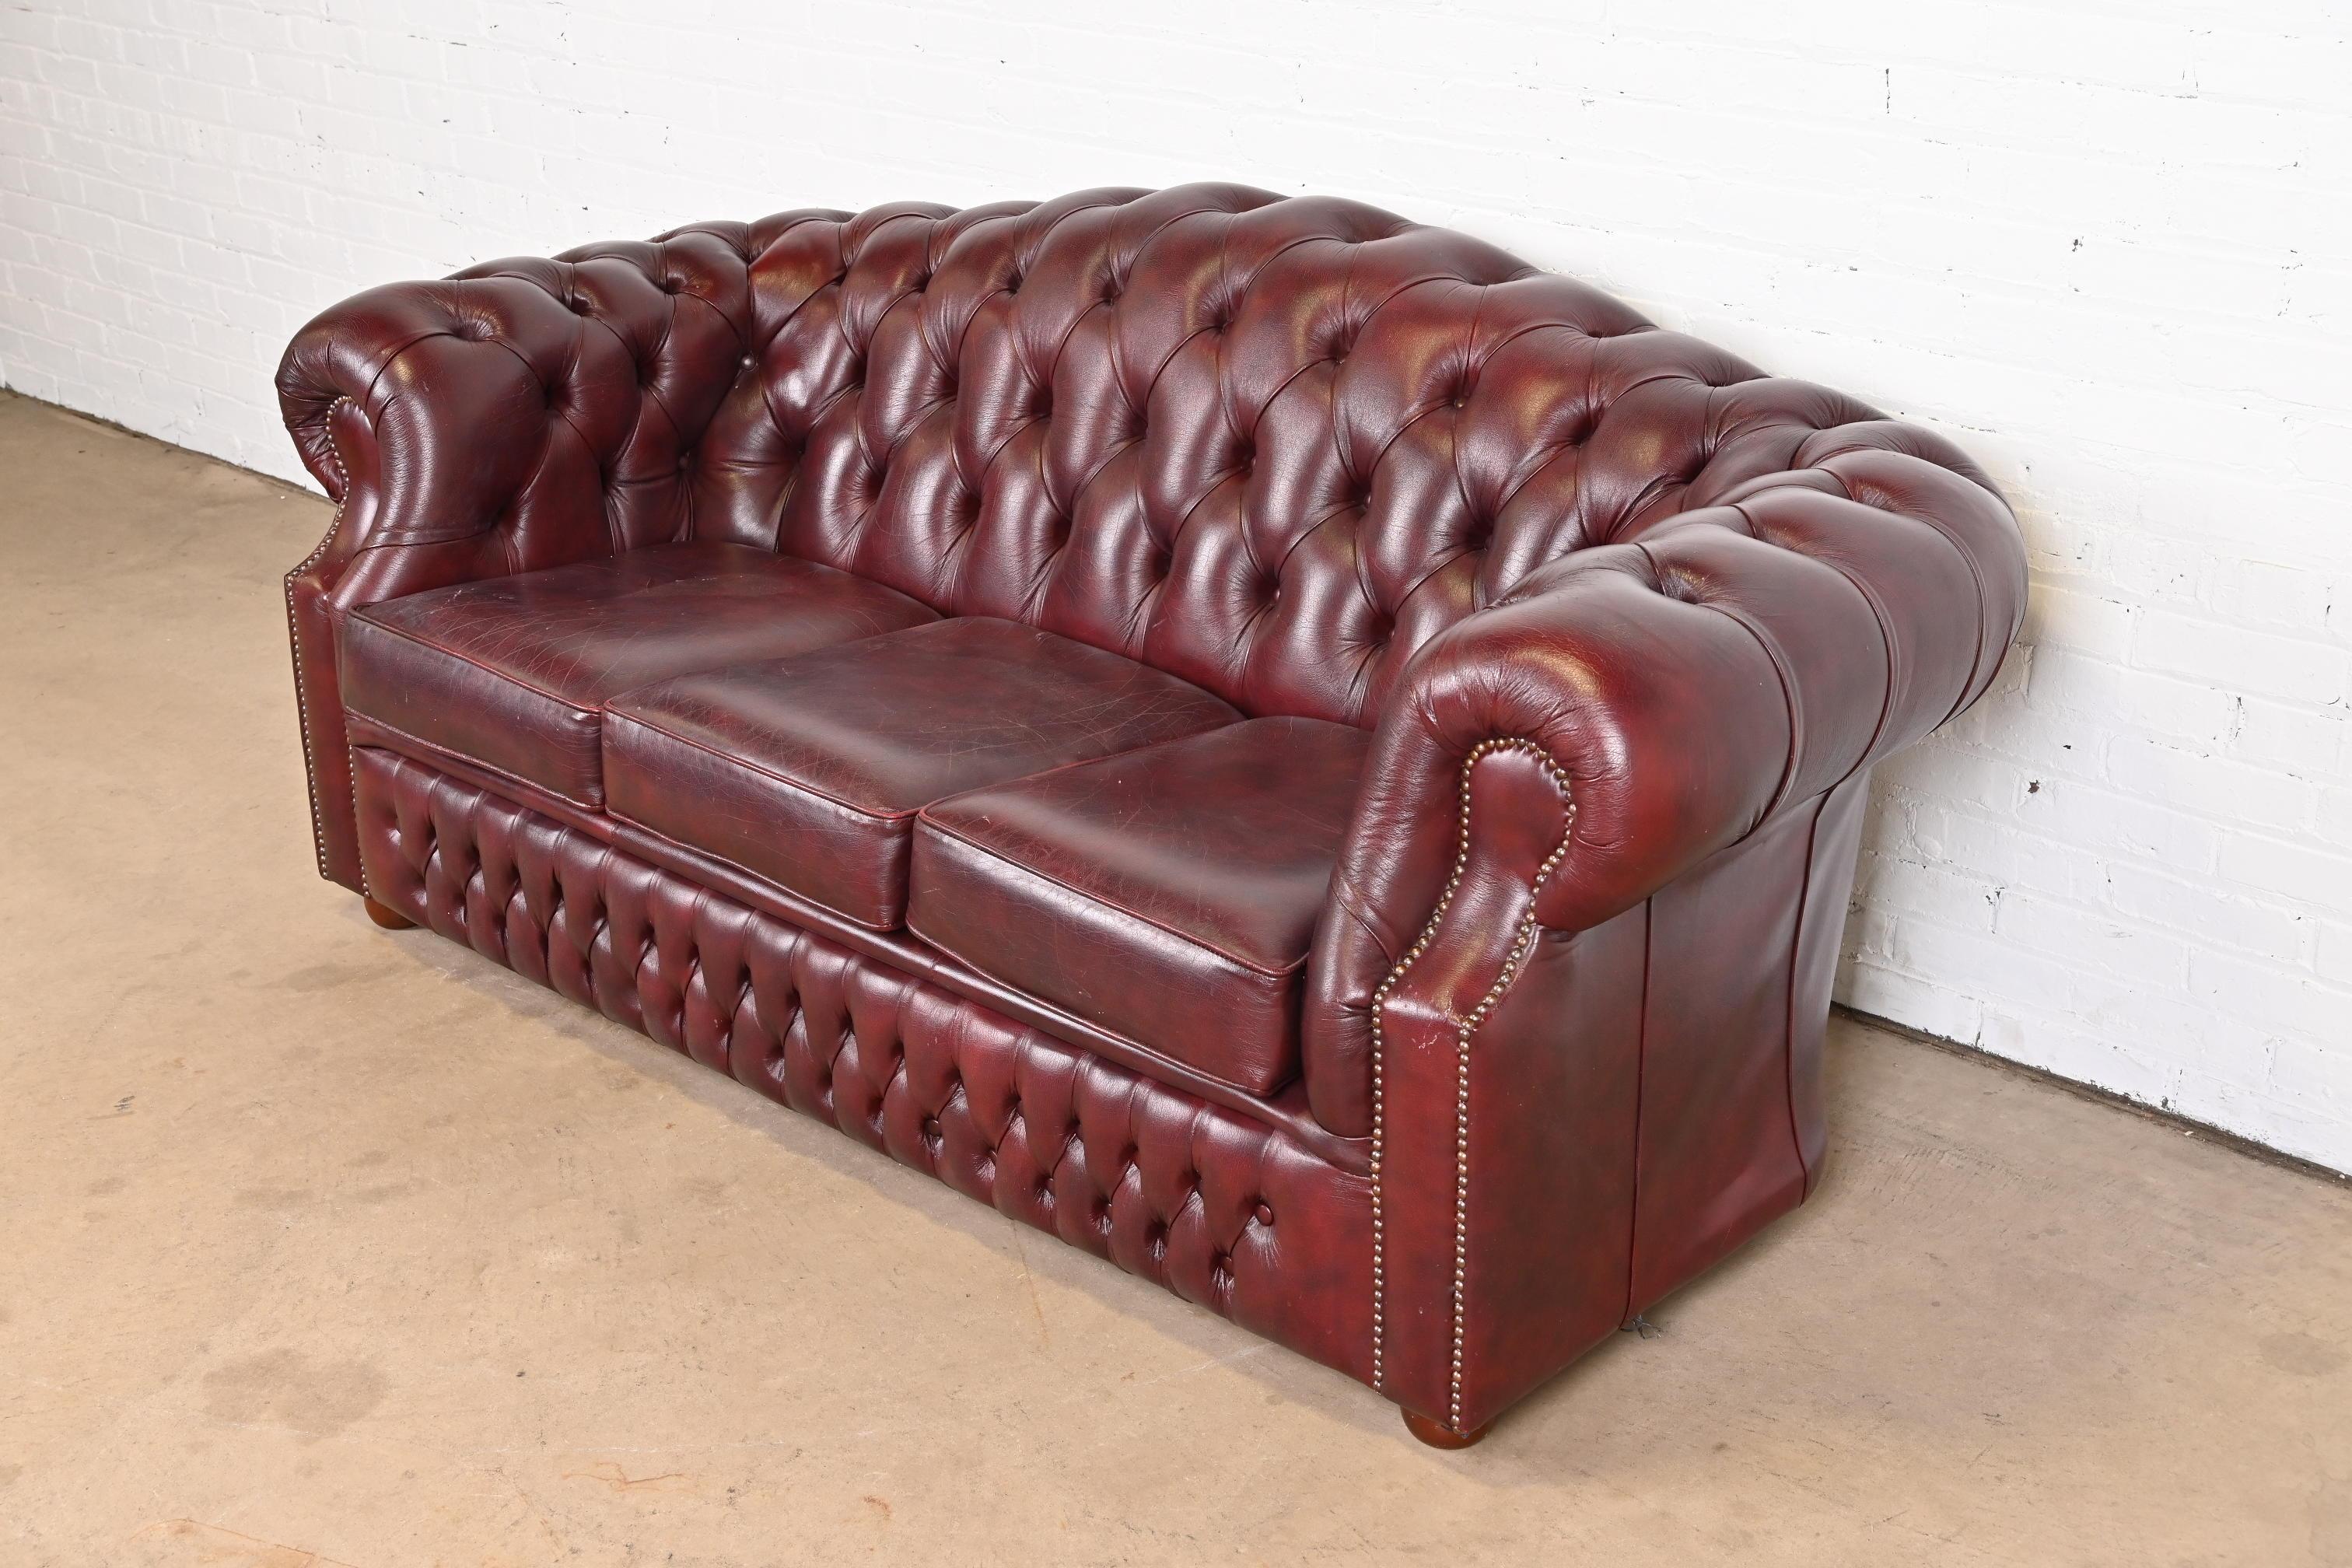 Brass Vintage English Tufted Oxblood Leather Camelback Chesterfield Sofa